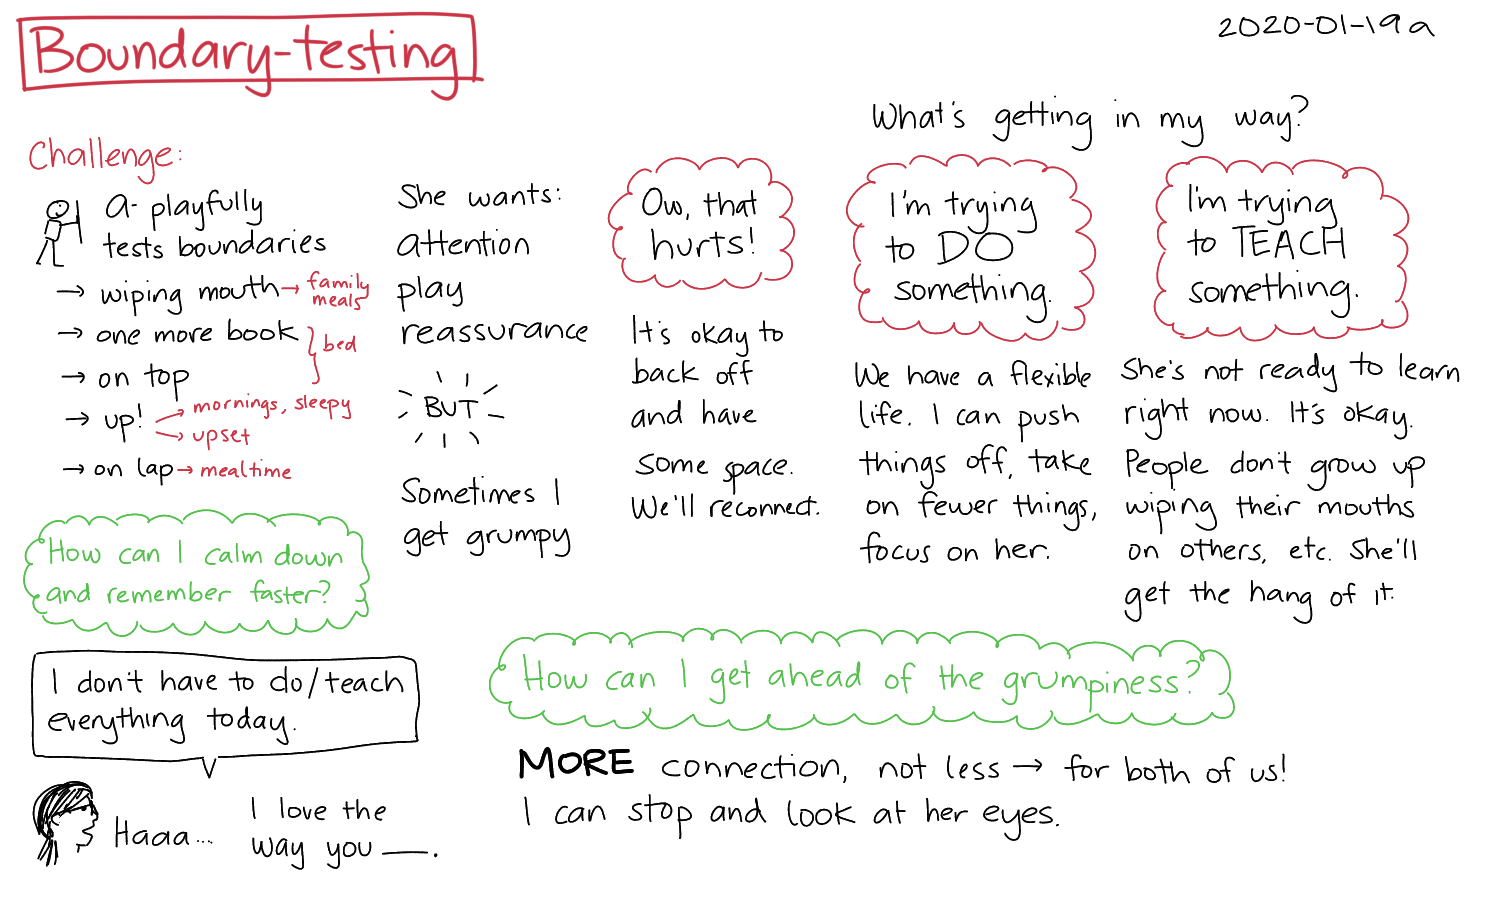 2020-01-19a Boundary-testing #parenting.png